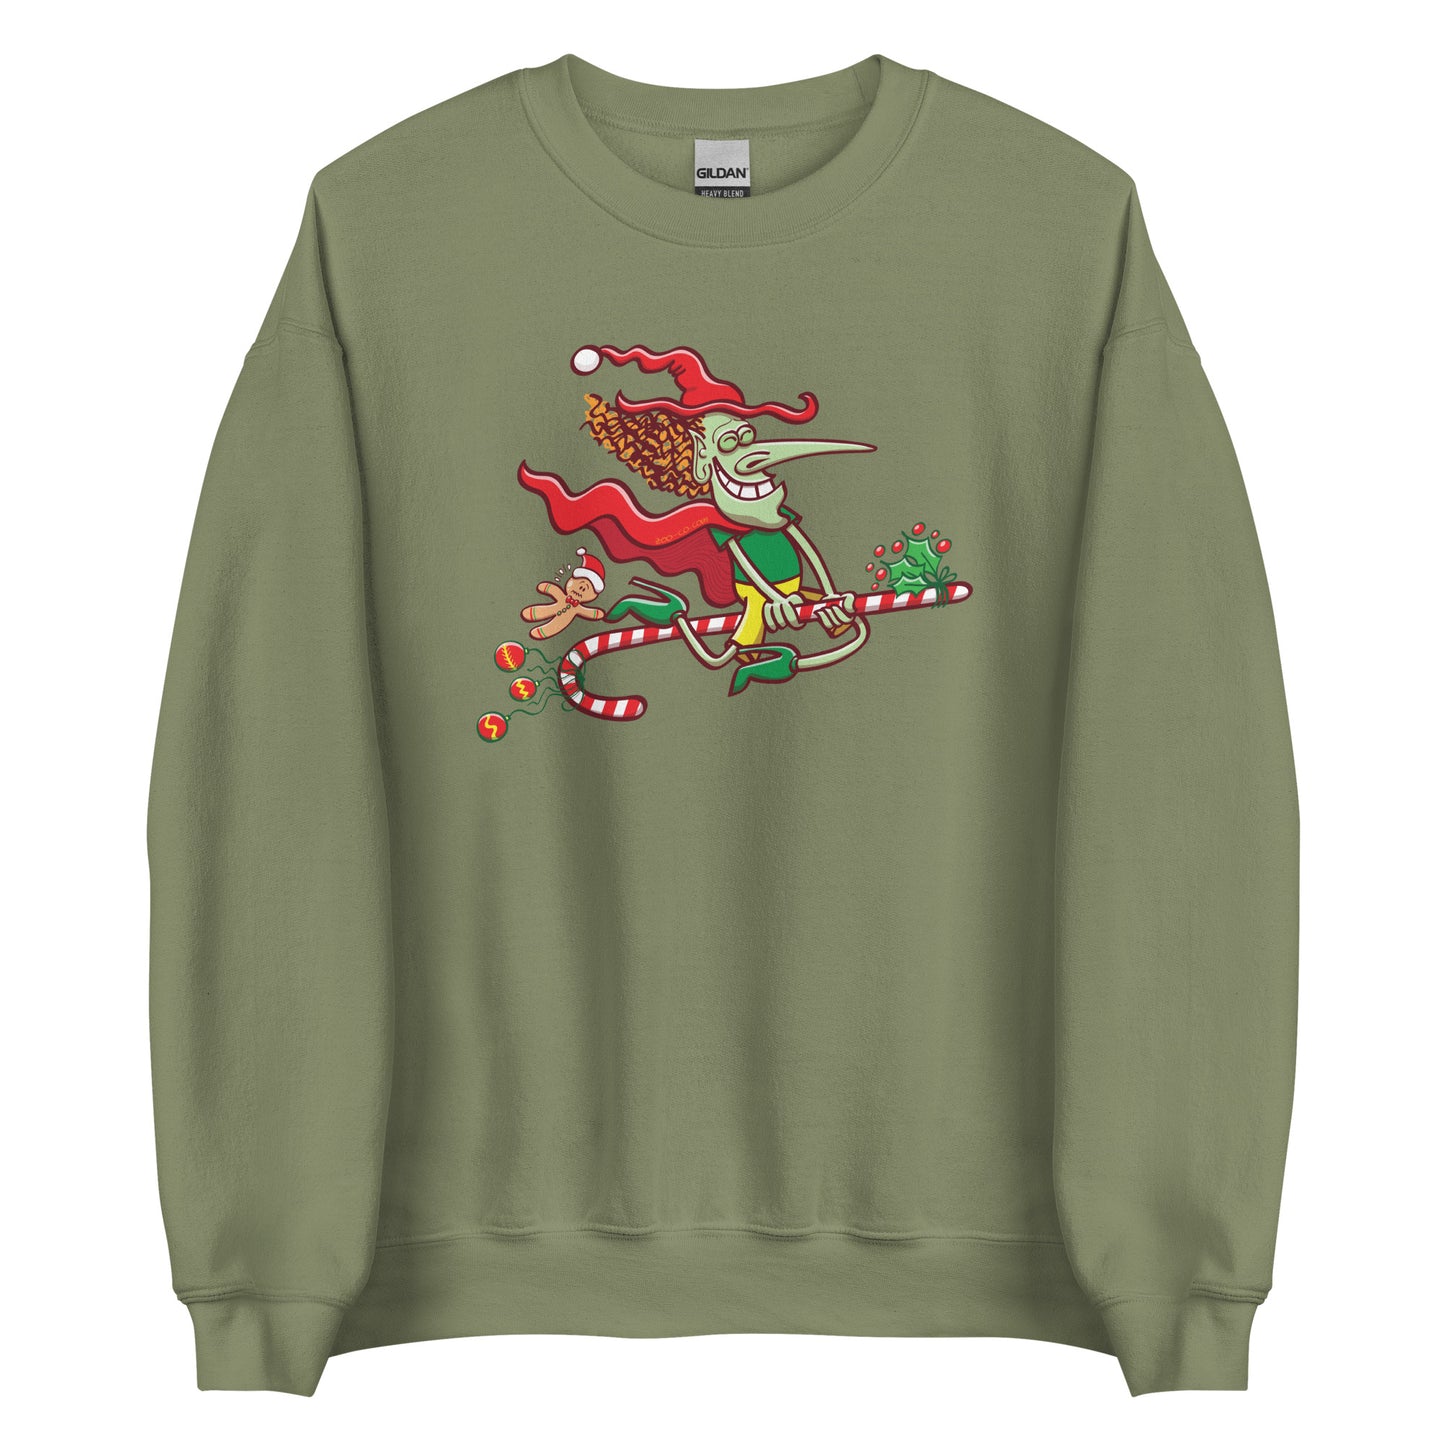 Mischievous witch having fun at Christmas - Unisex Sweatshirt. Military green. Front view